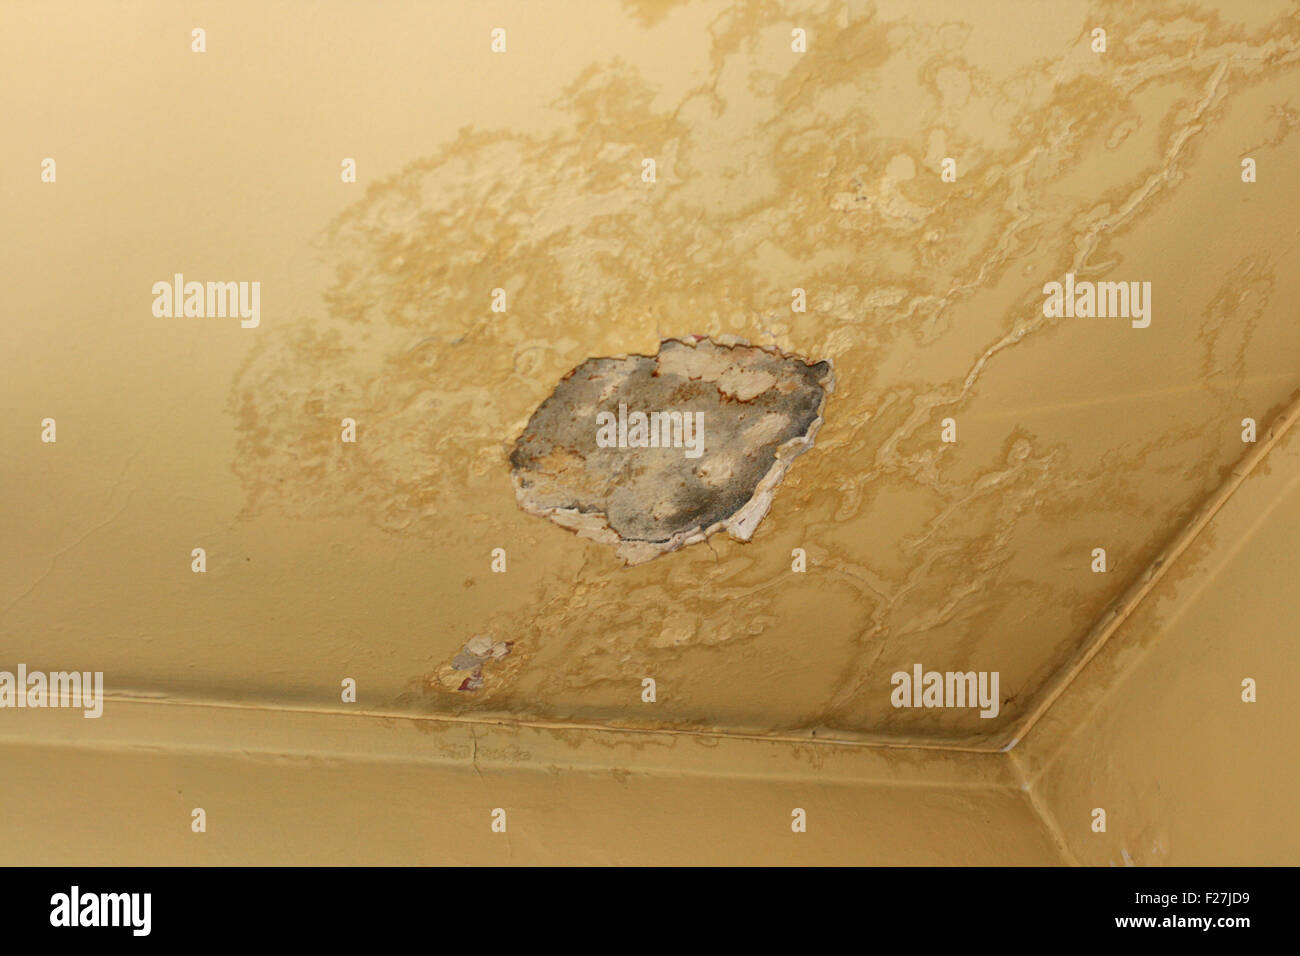 Crack In The Ceiling Of An Old House Stock Photo 87449301